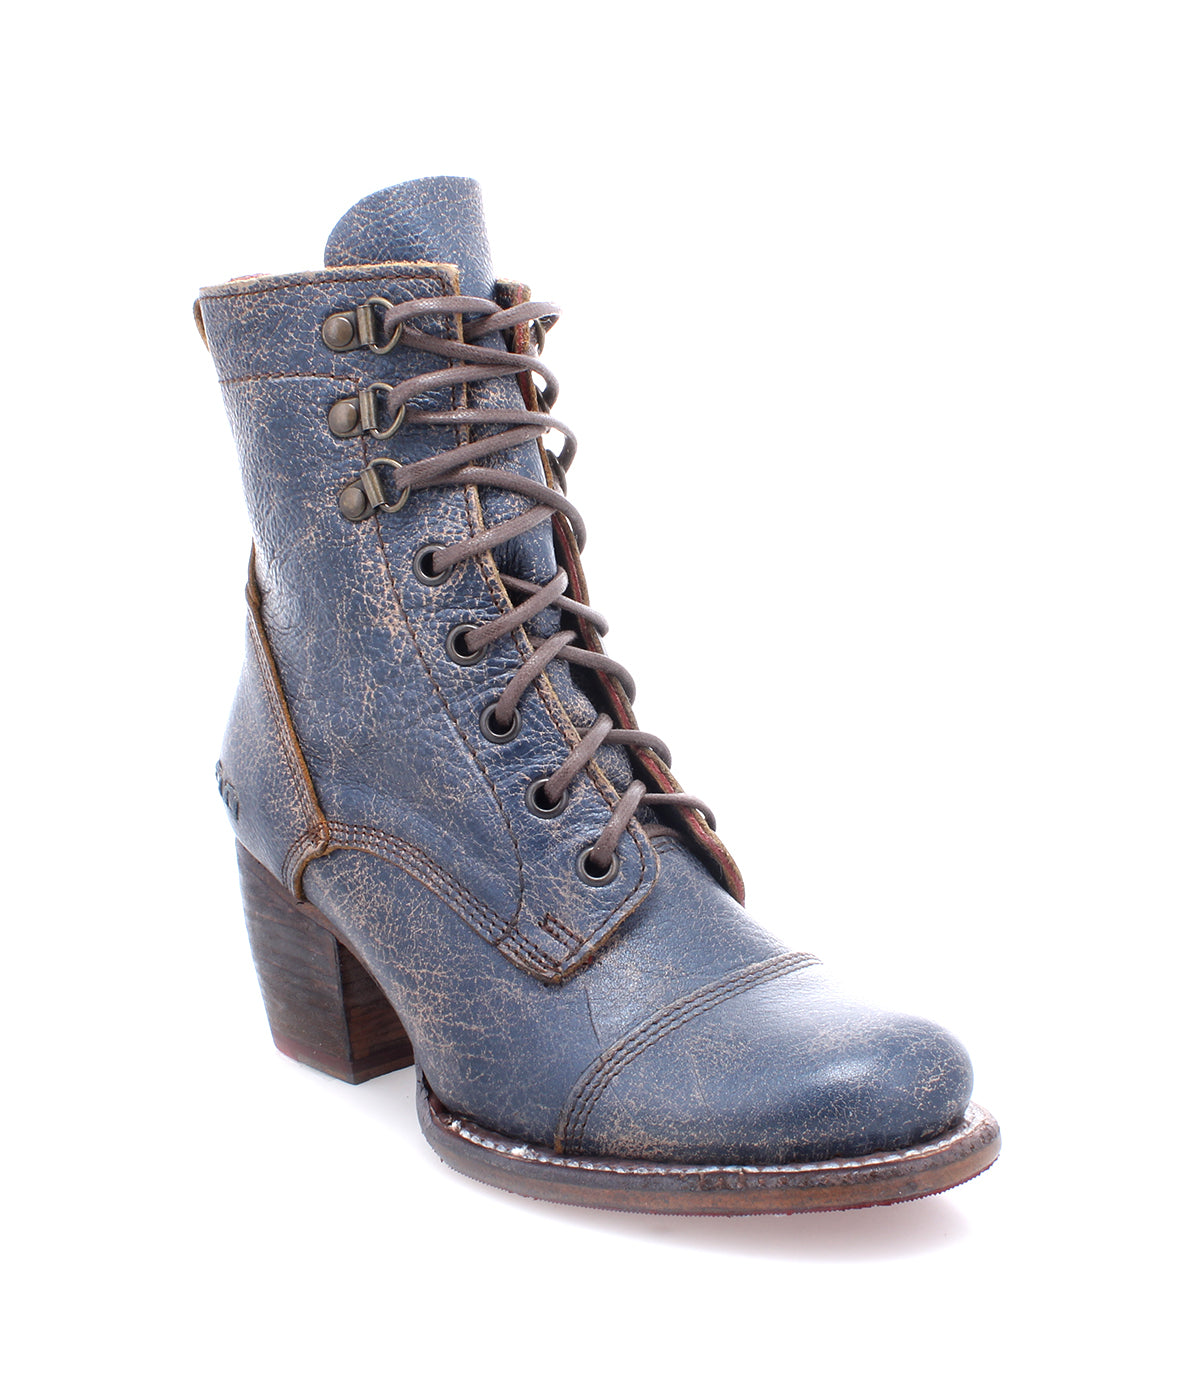 A women's Judgement boot by Bed Stu with laces.